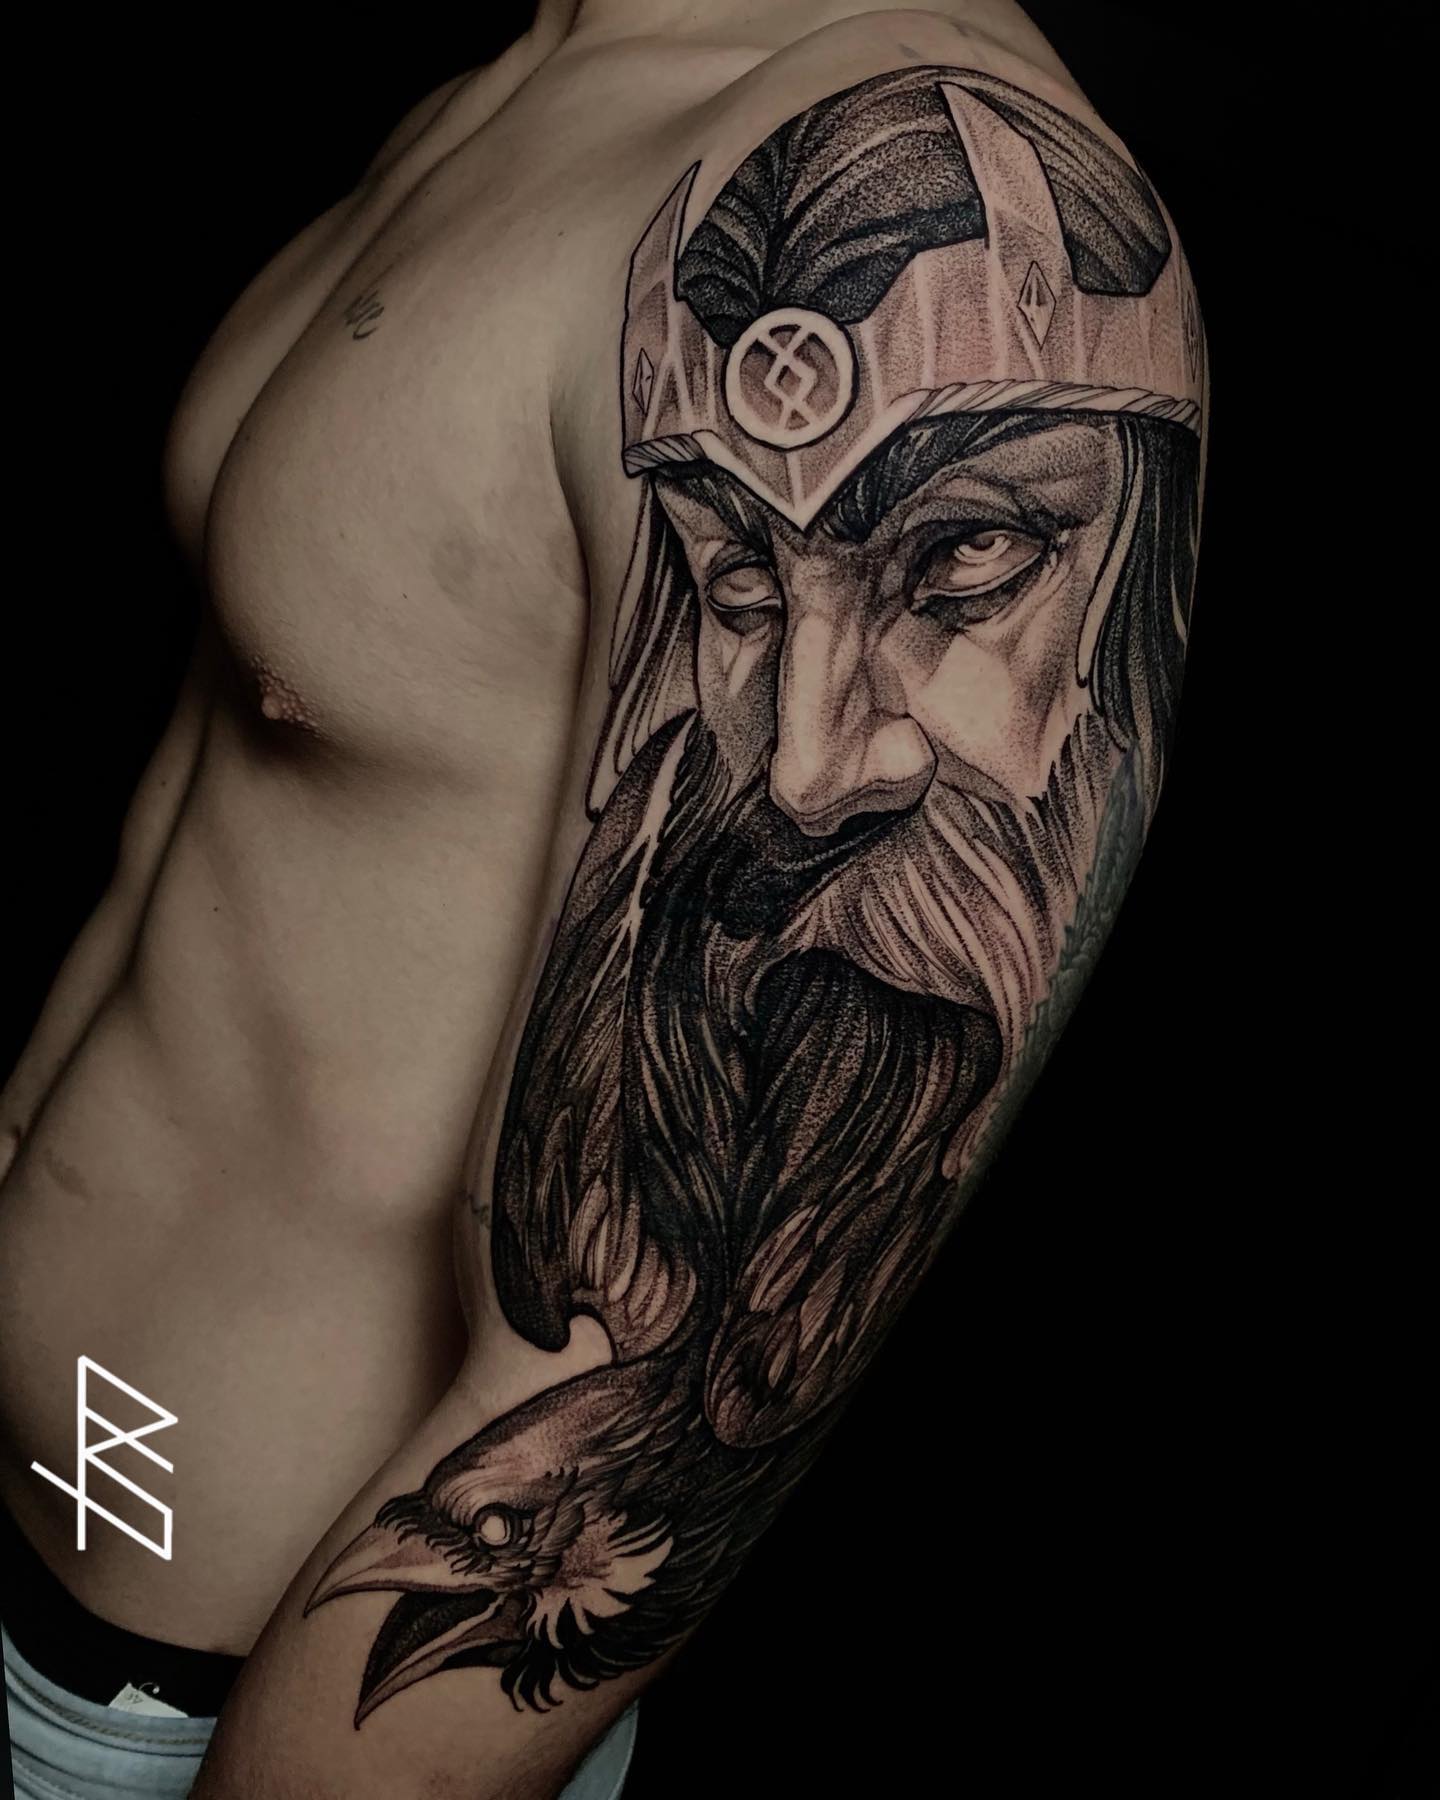 Amazing Nordic Raven Tattoos Inspired by Vikings: 34 Photo Ideas